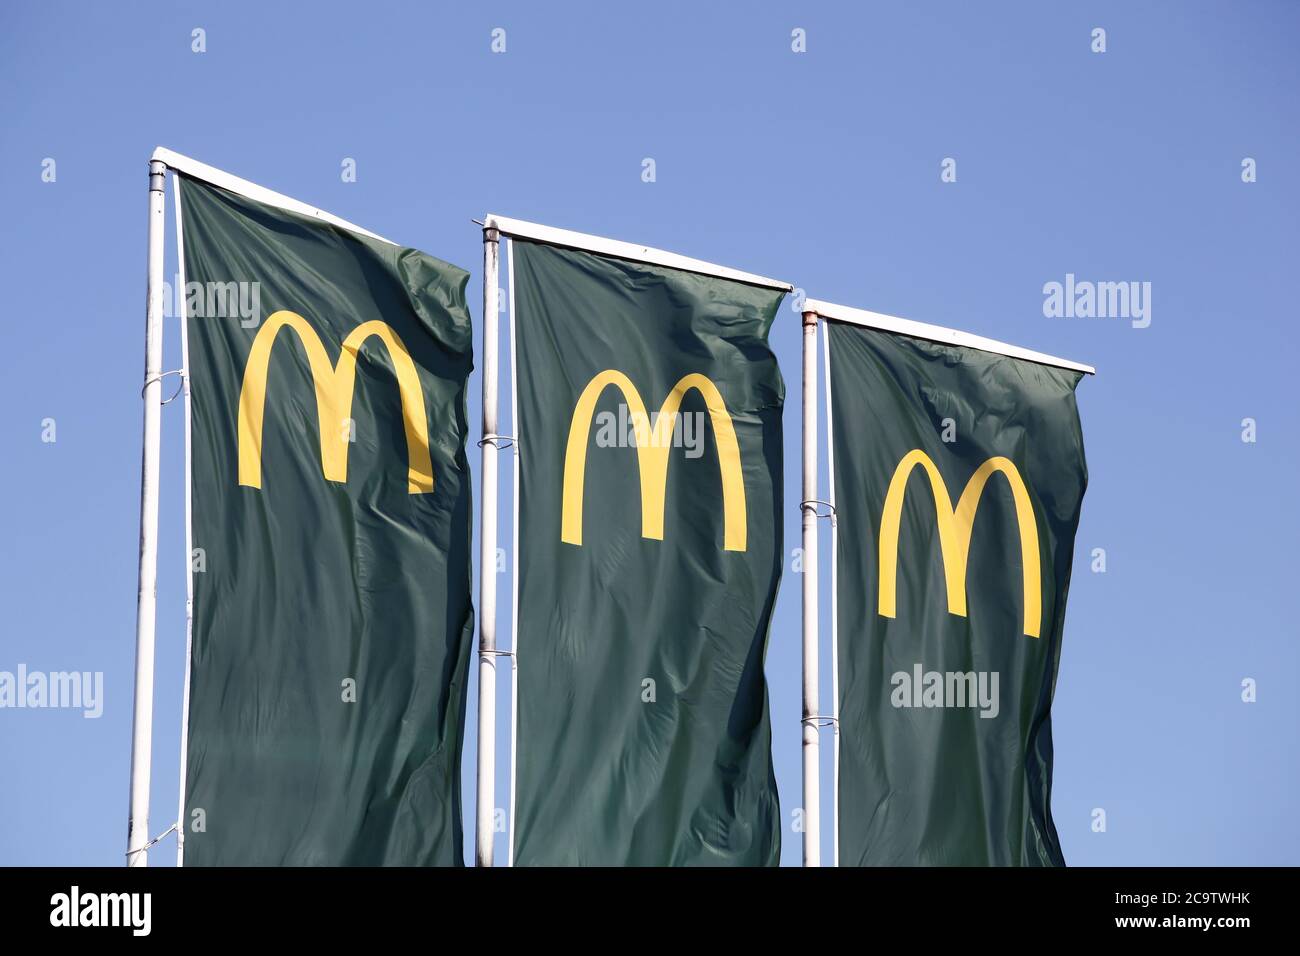 Villefranche, France - May 17, 2020: Flags of Mc Donald's. McDonald's is the world's largest chain of hamburger fast food restaurants Stock Photo